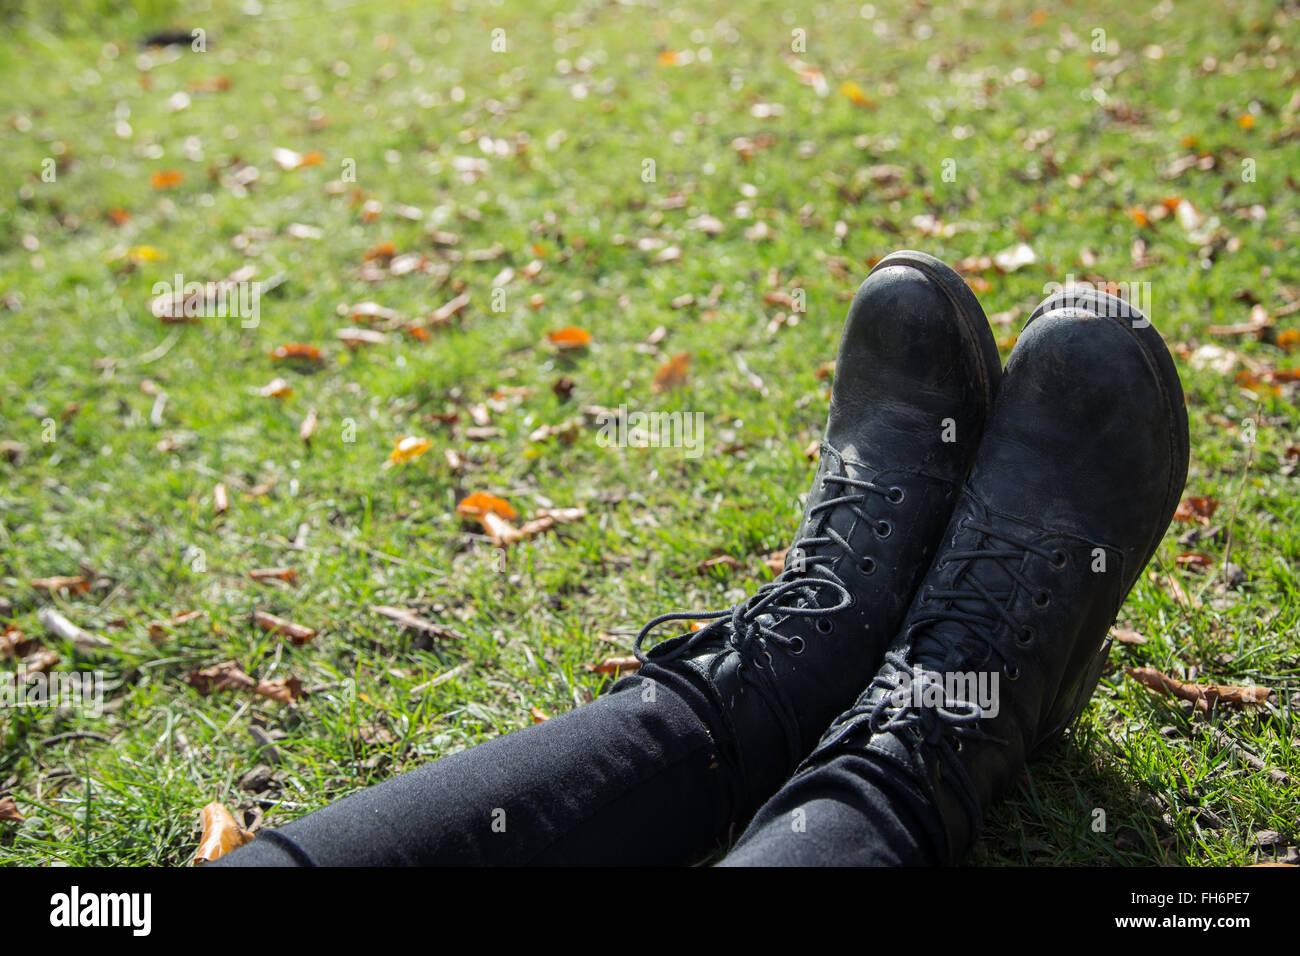 A photograph of a girls black boots and pants in the grass. Stock Photo